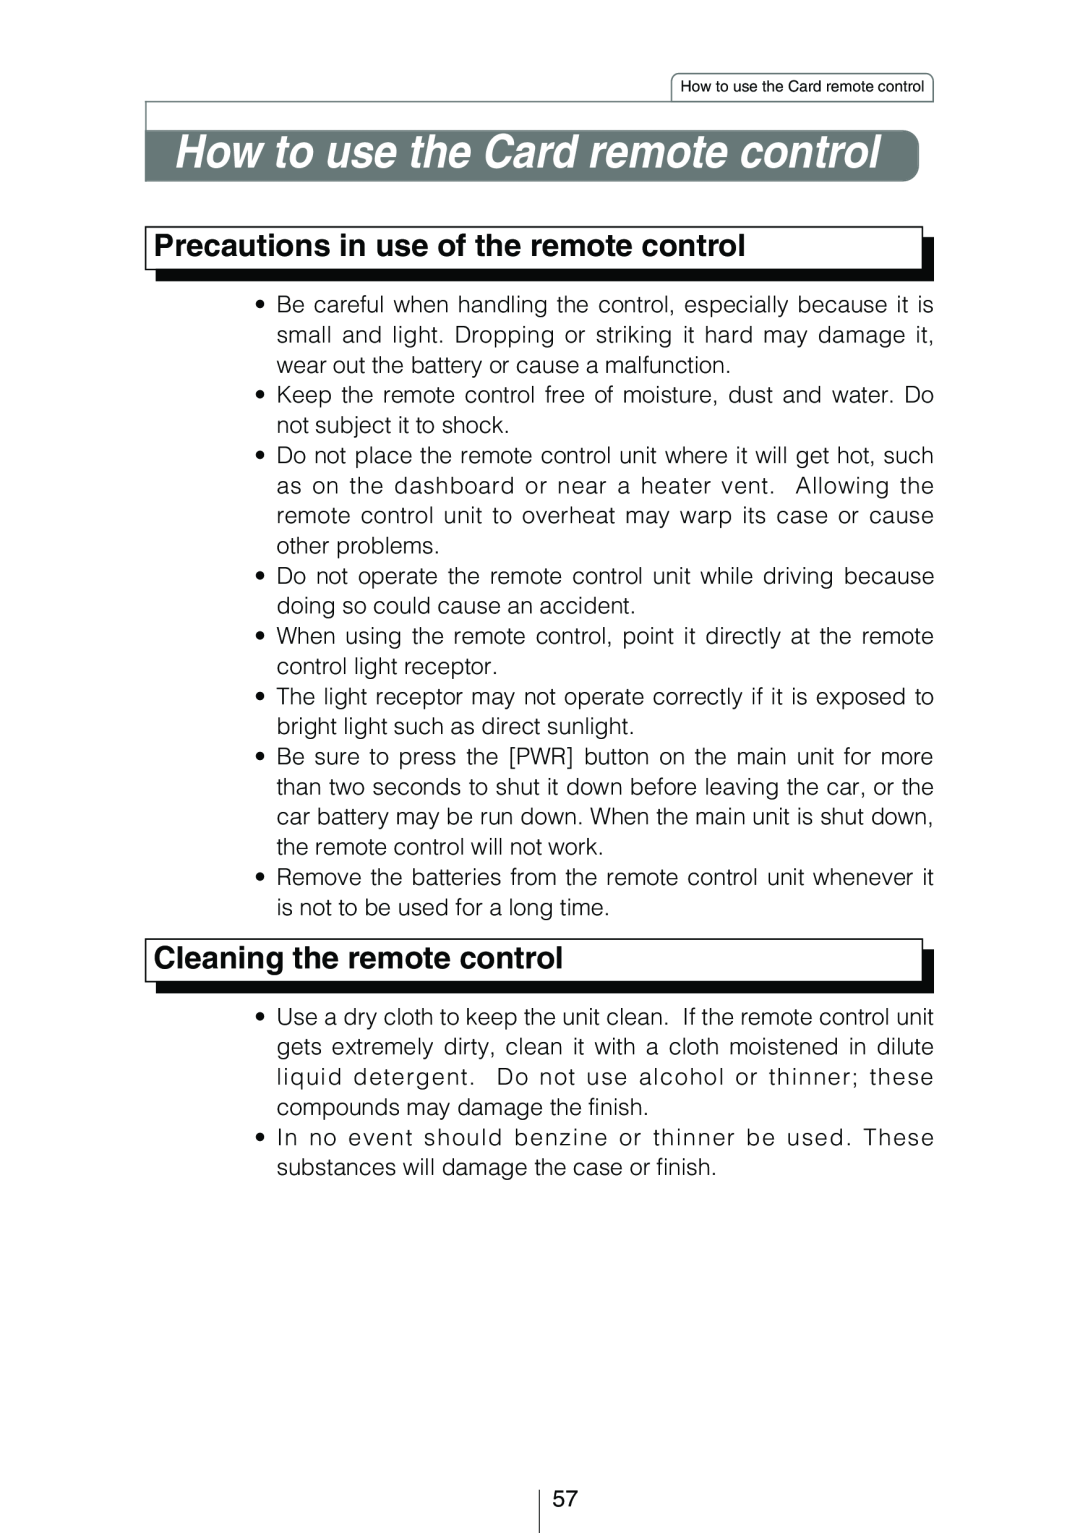 Eclipse - Fujitsu Ten CD3434 owner manual How to use the Card remote control, Precautions in use of the remote control 